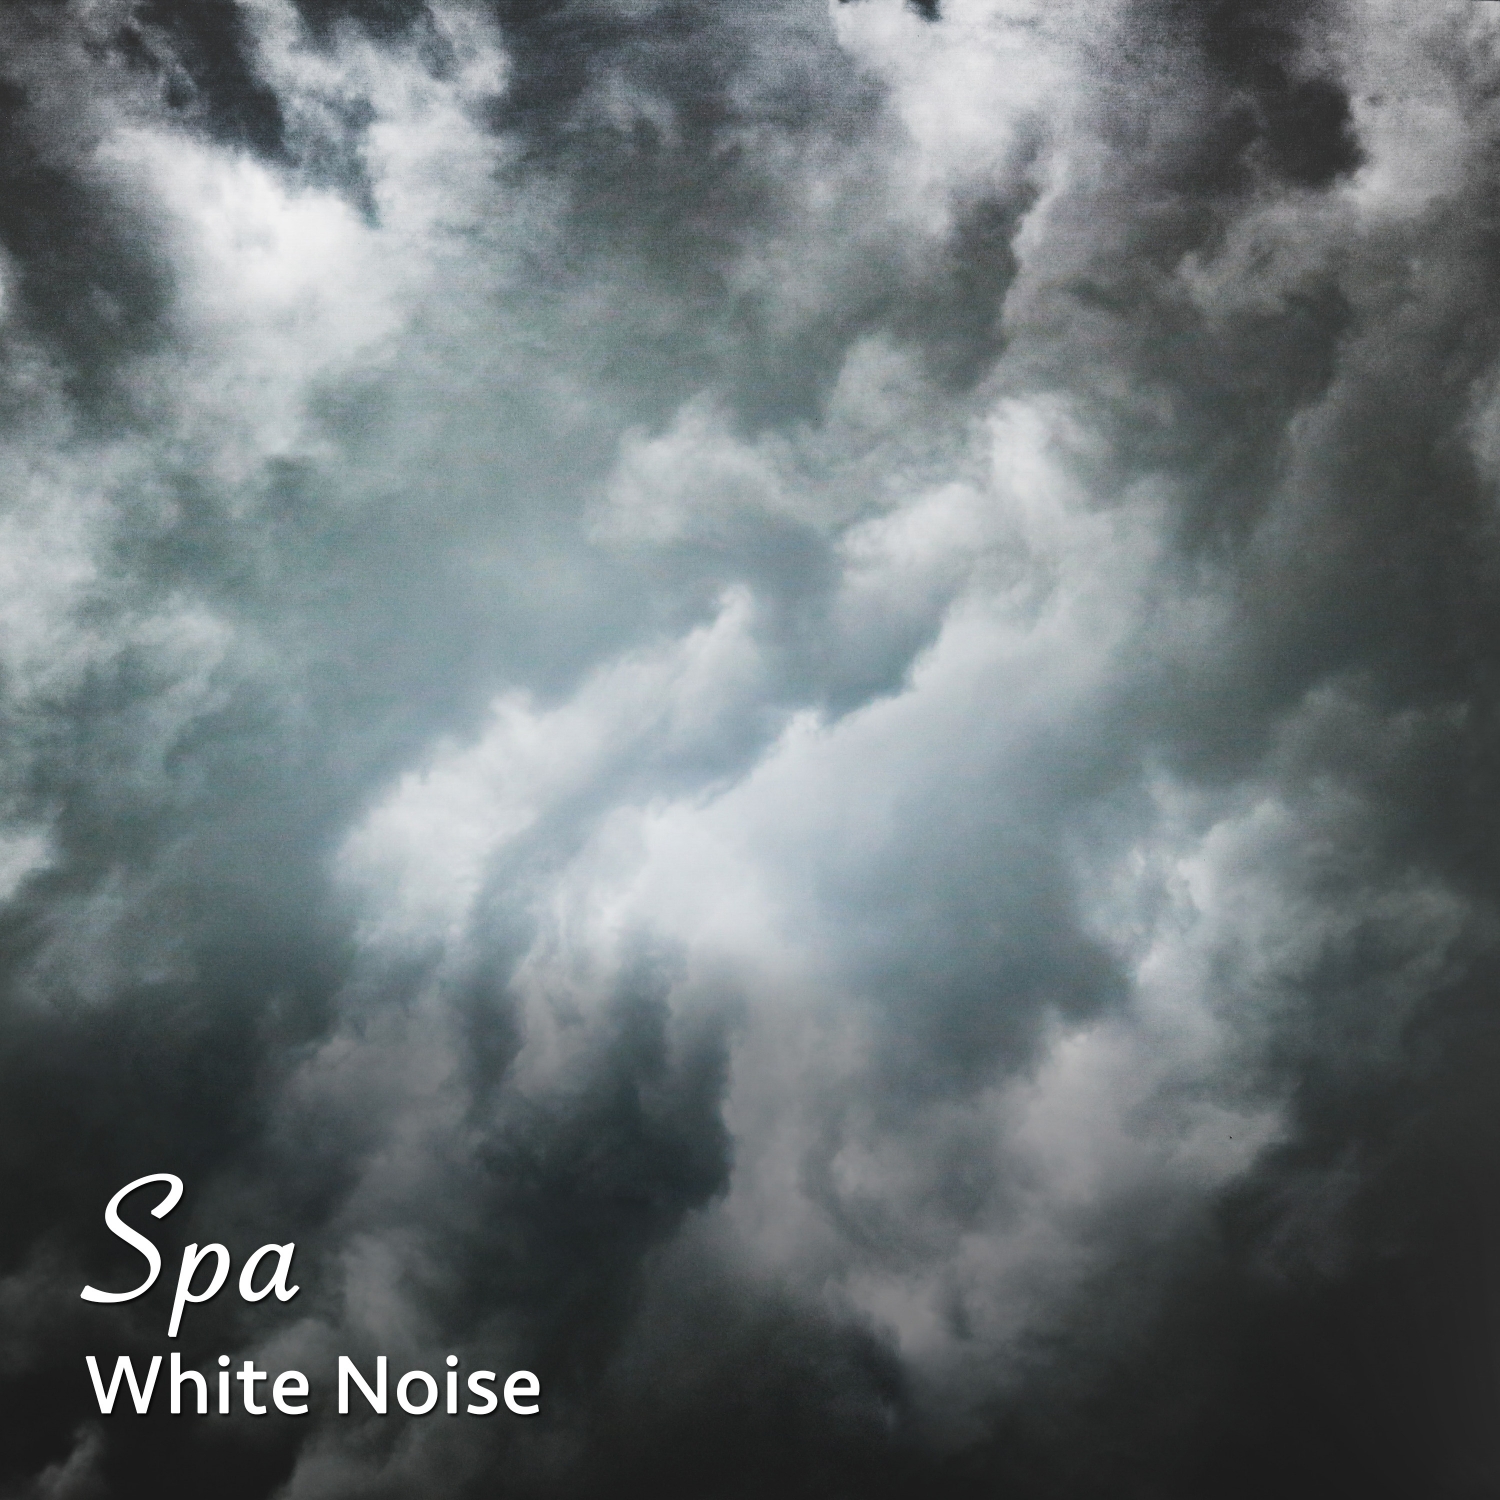 20 Spa White Noise Tracks: Sounds of Natural Thunderstorms